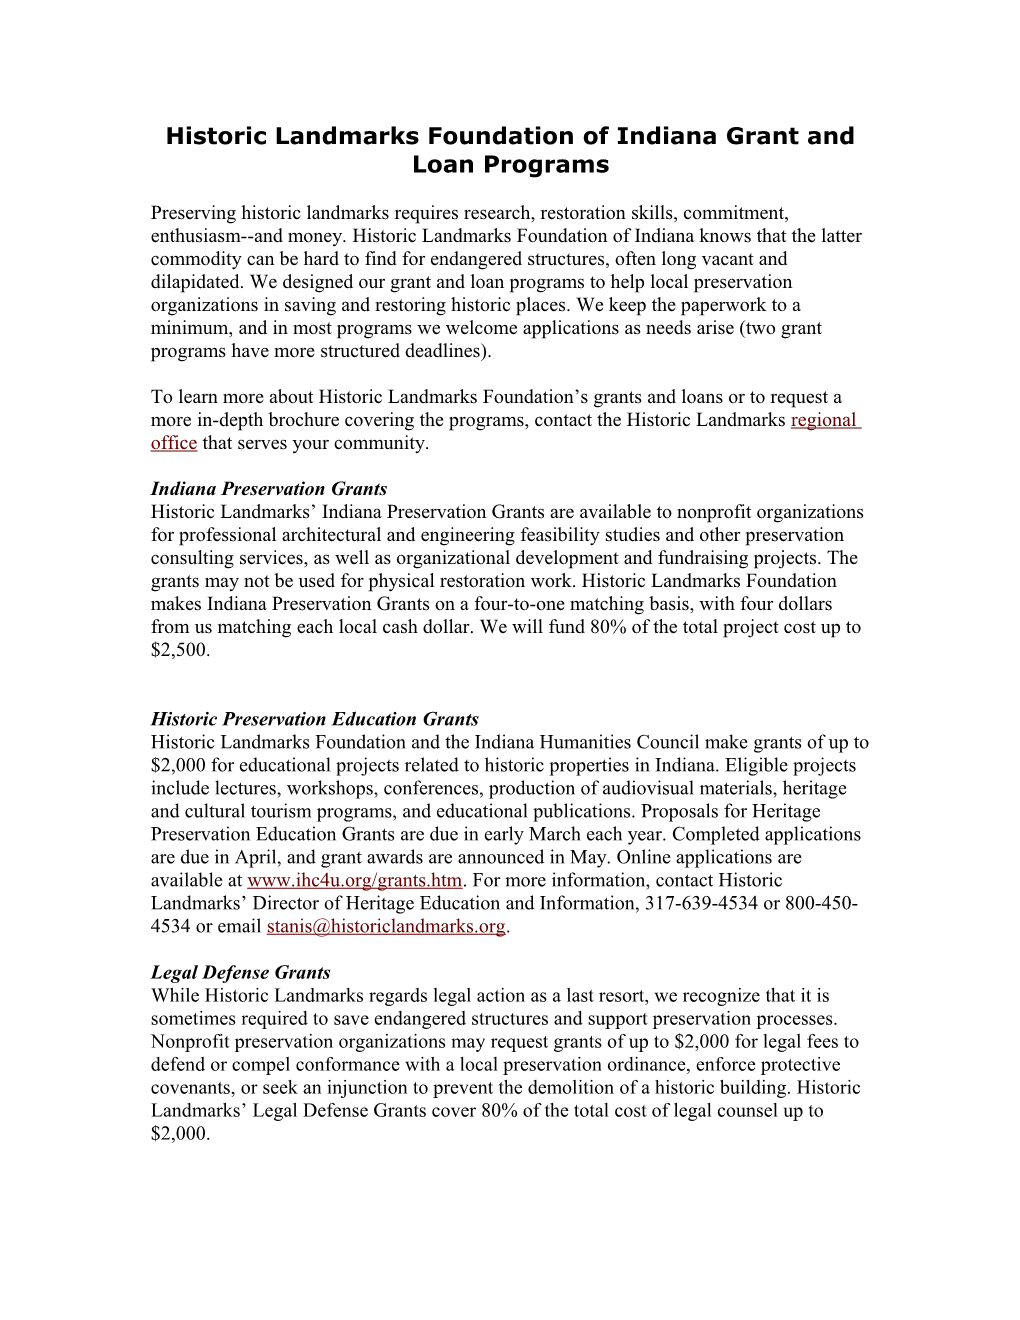 Historic Landmarks Foundation of Indiana Grant and Loan Programs